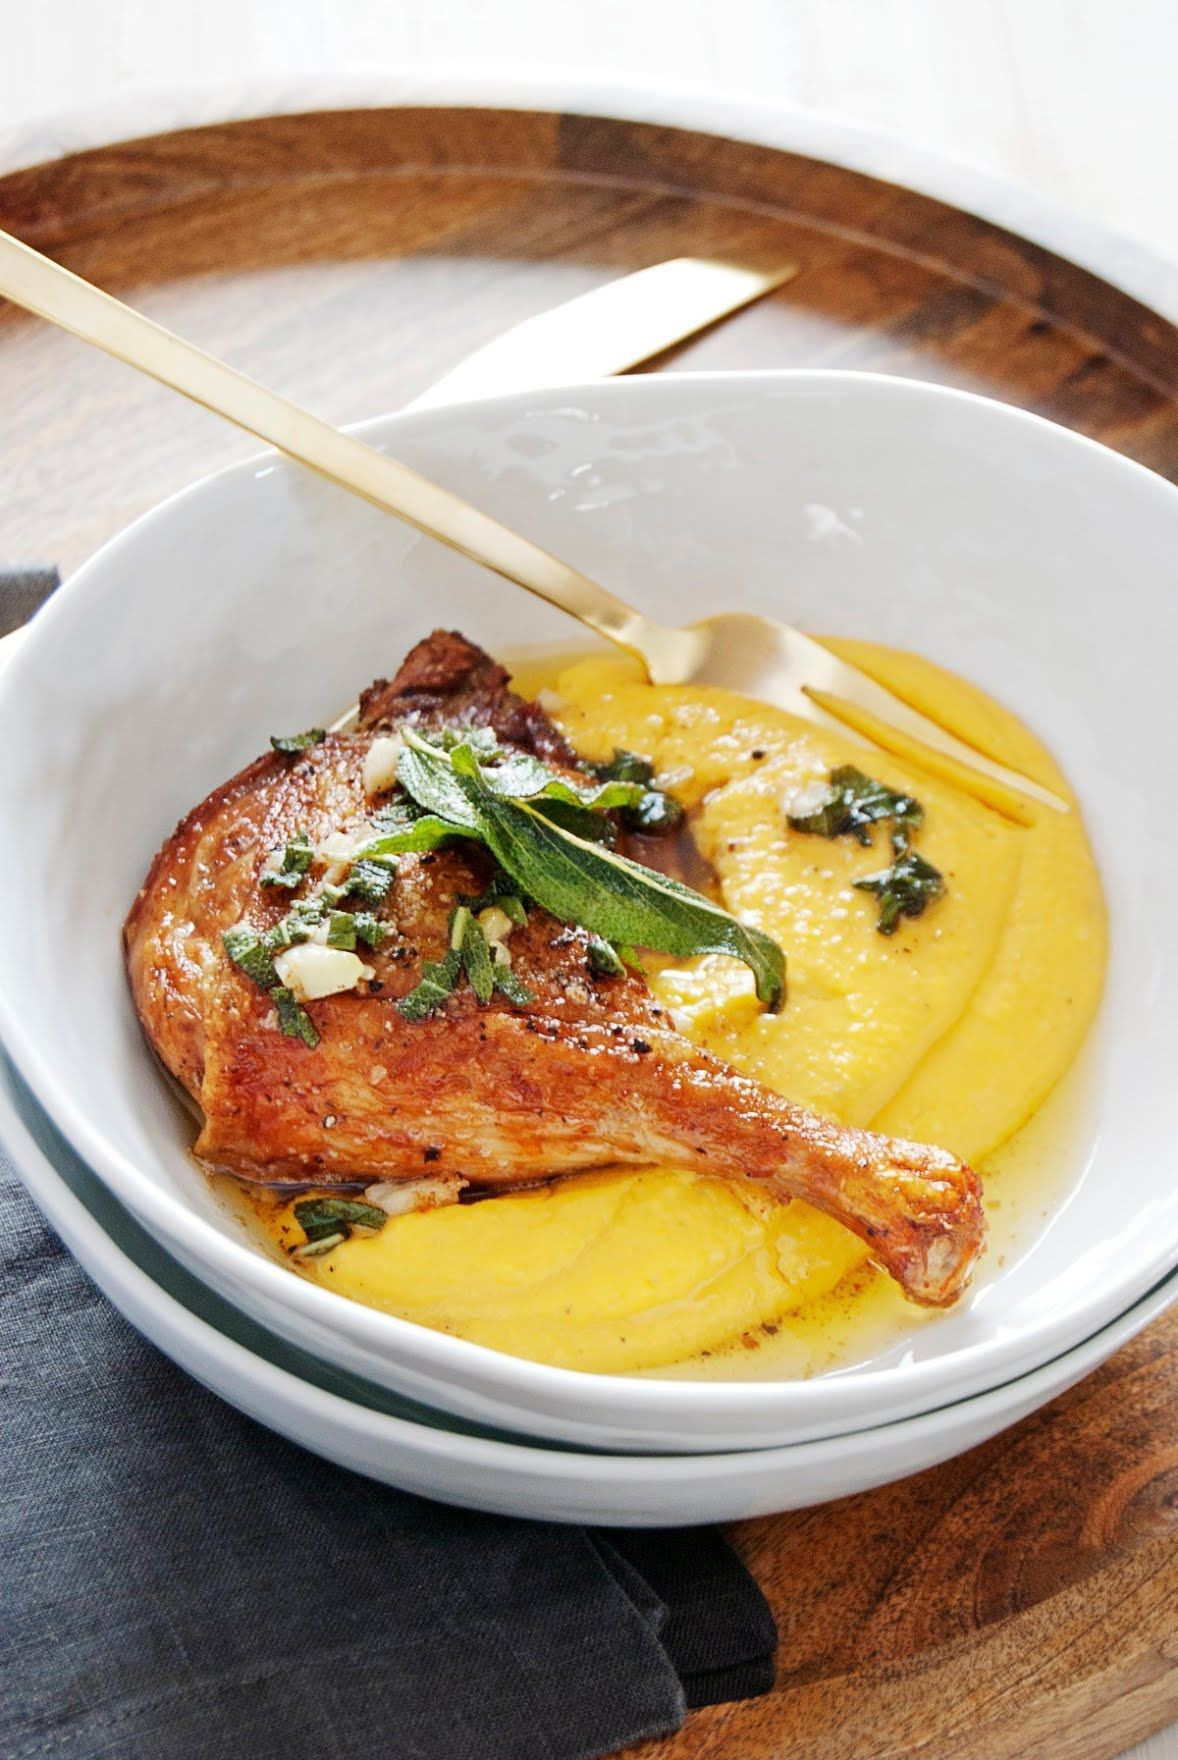 Crispy Duck Leg Recipes
 Oven Roasted Duck Legs with Butternut Squash Puree